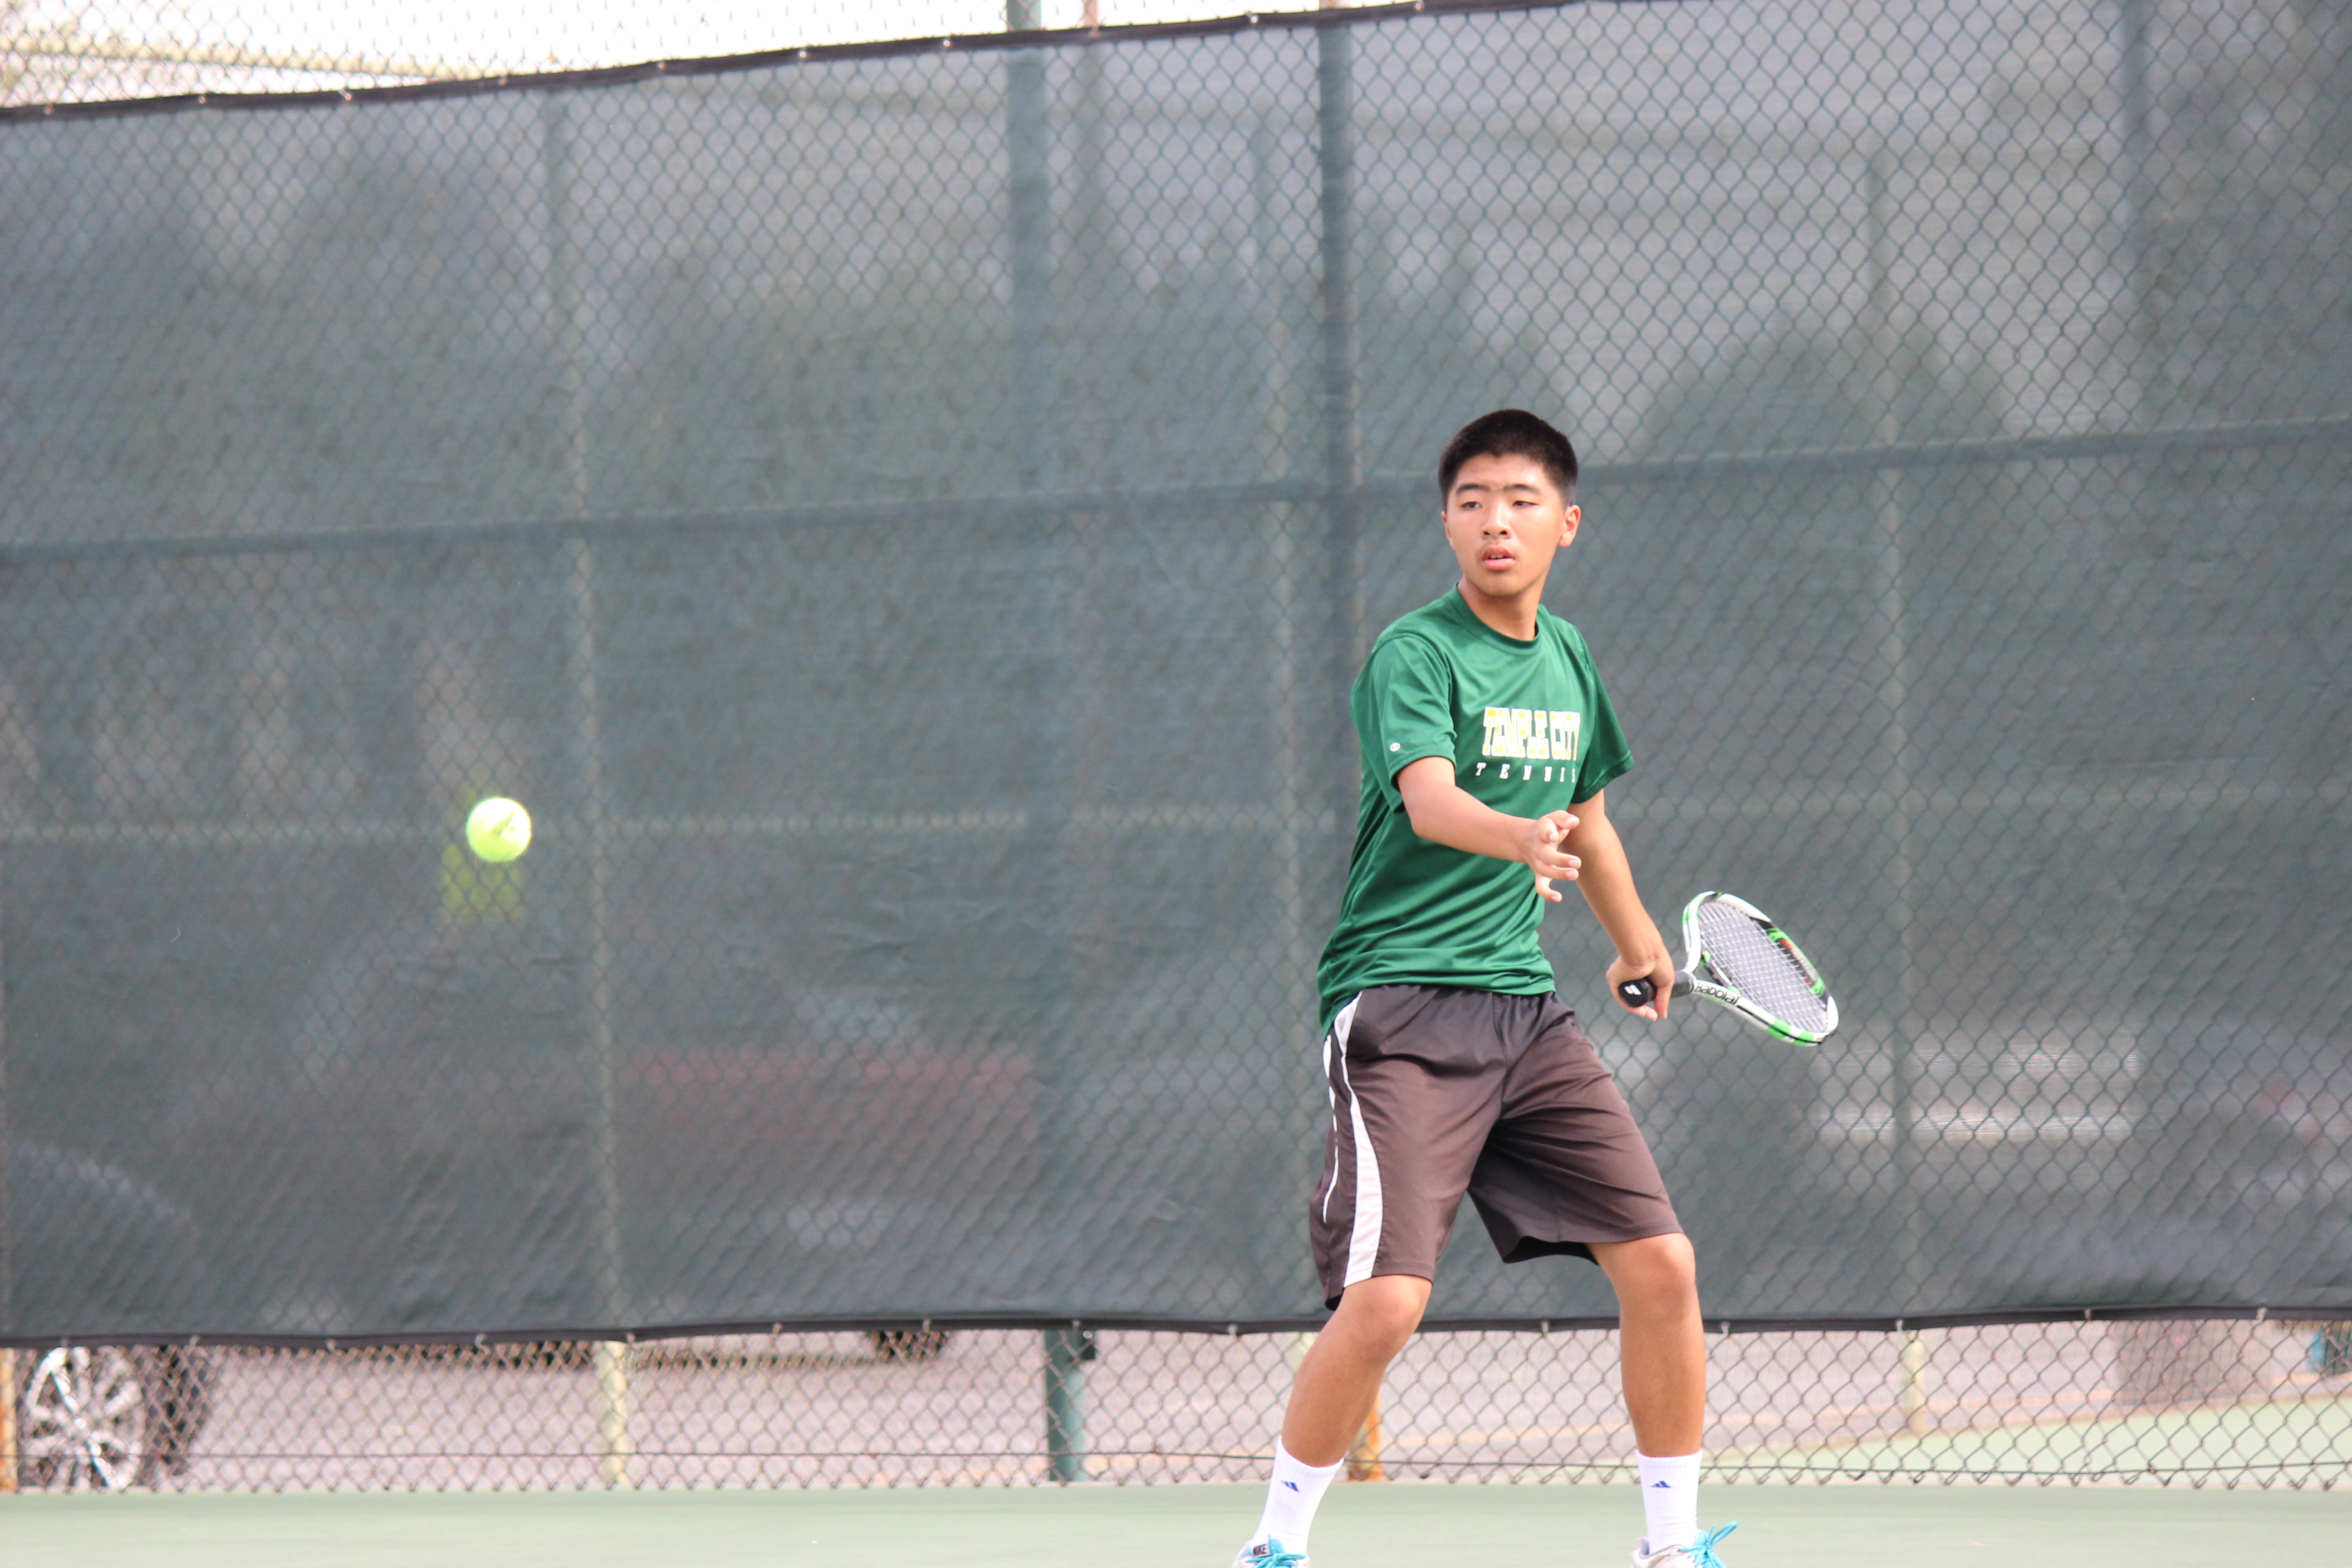 Boys tennis sets up for success